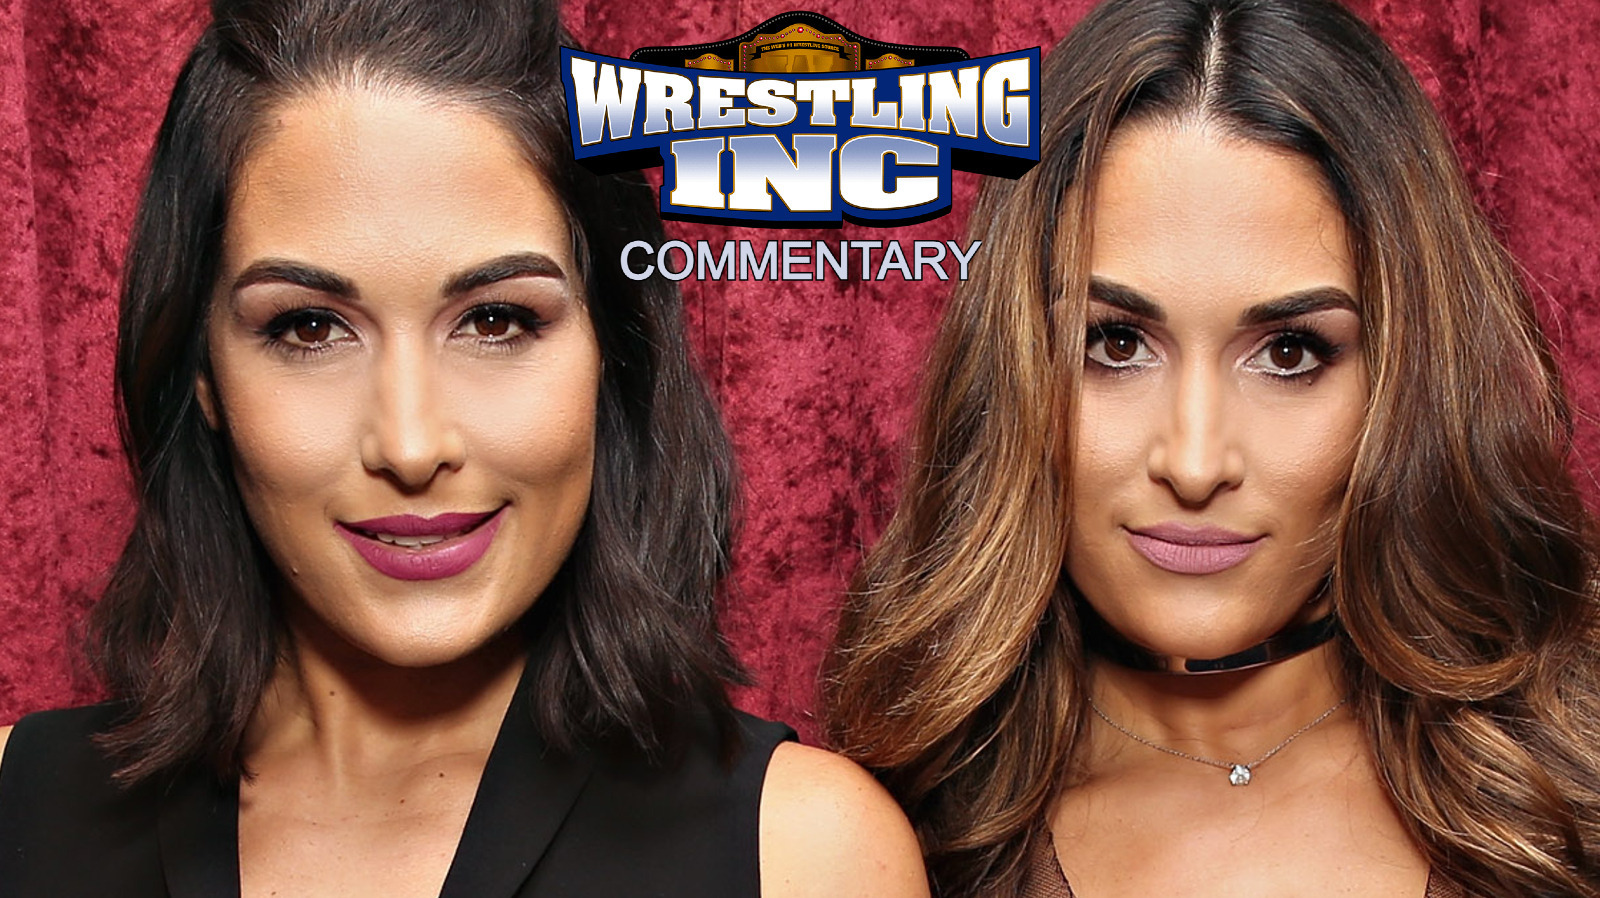 Nikki And Brie Garcia Would Be The Perfect Additions To Saraya’s Outcasts Faction In AEW – Wrestling Inc.